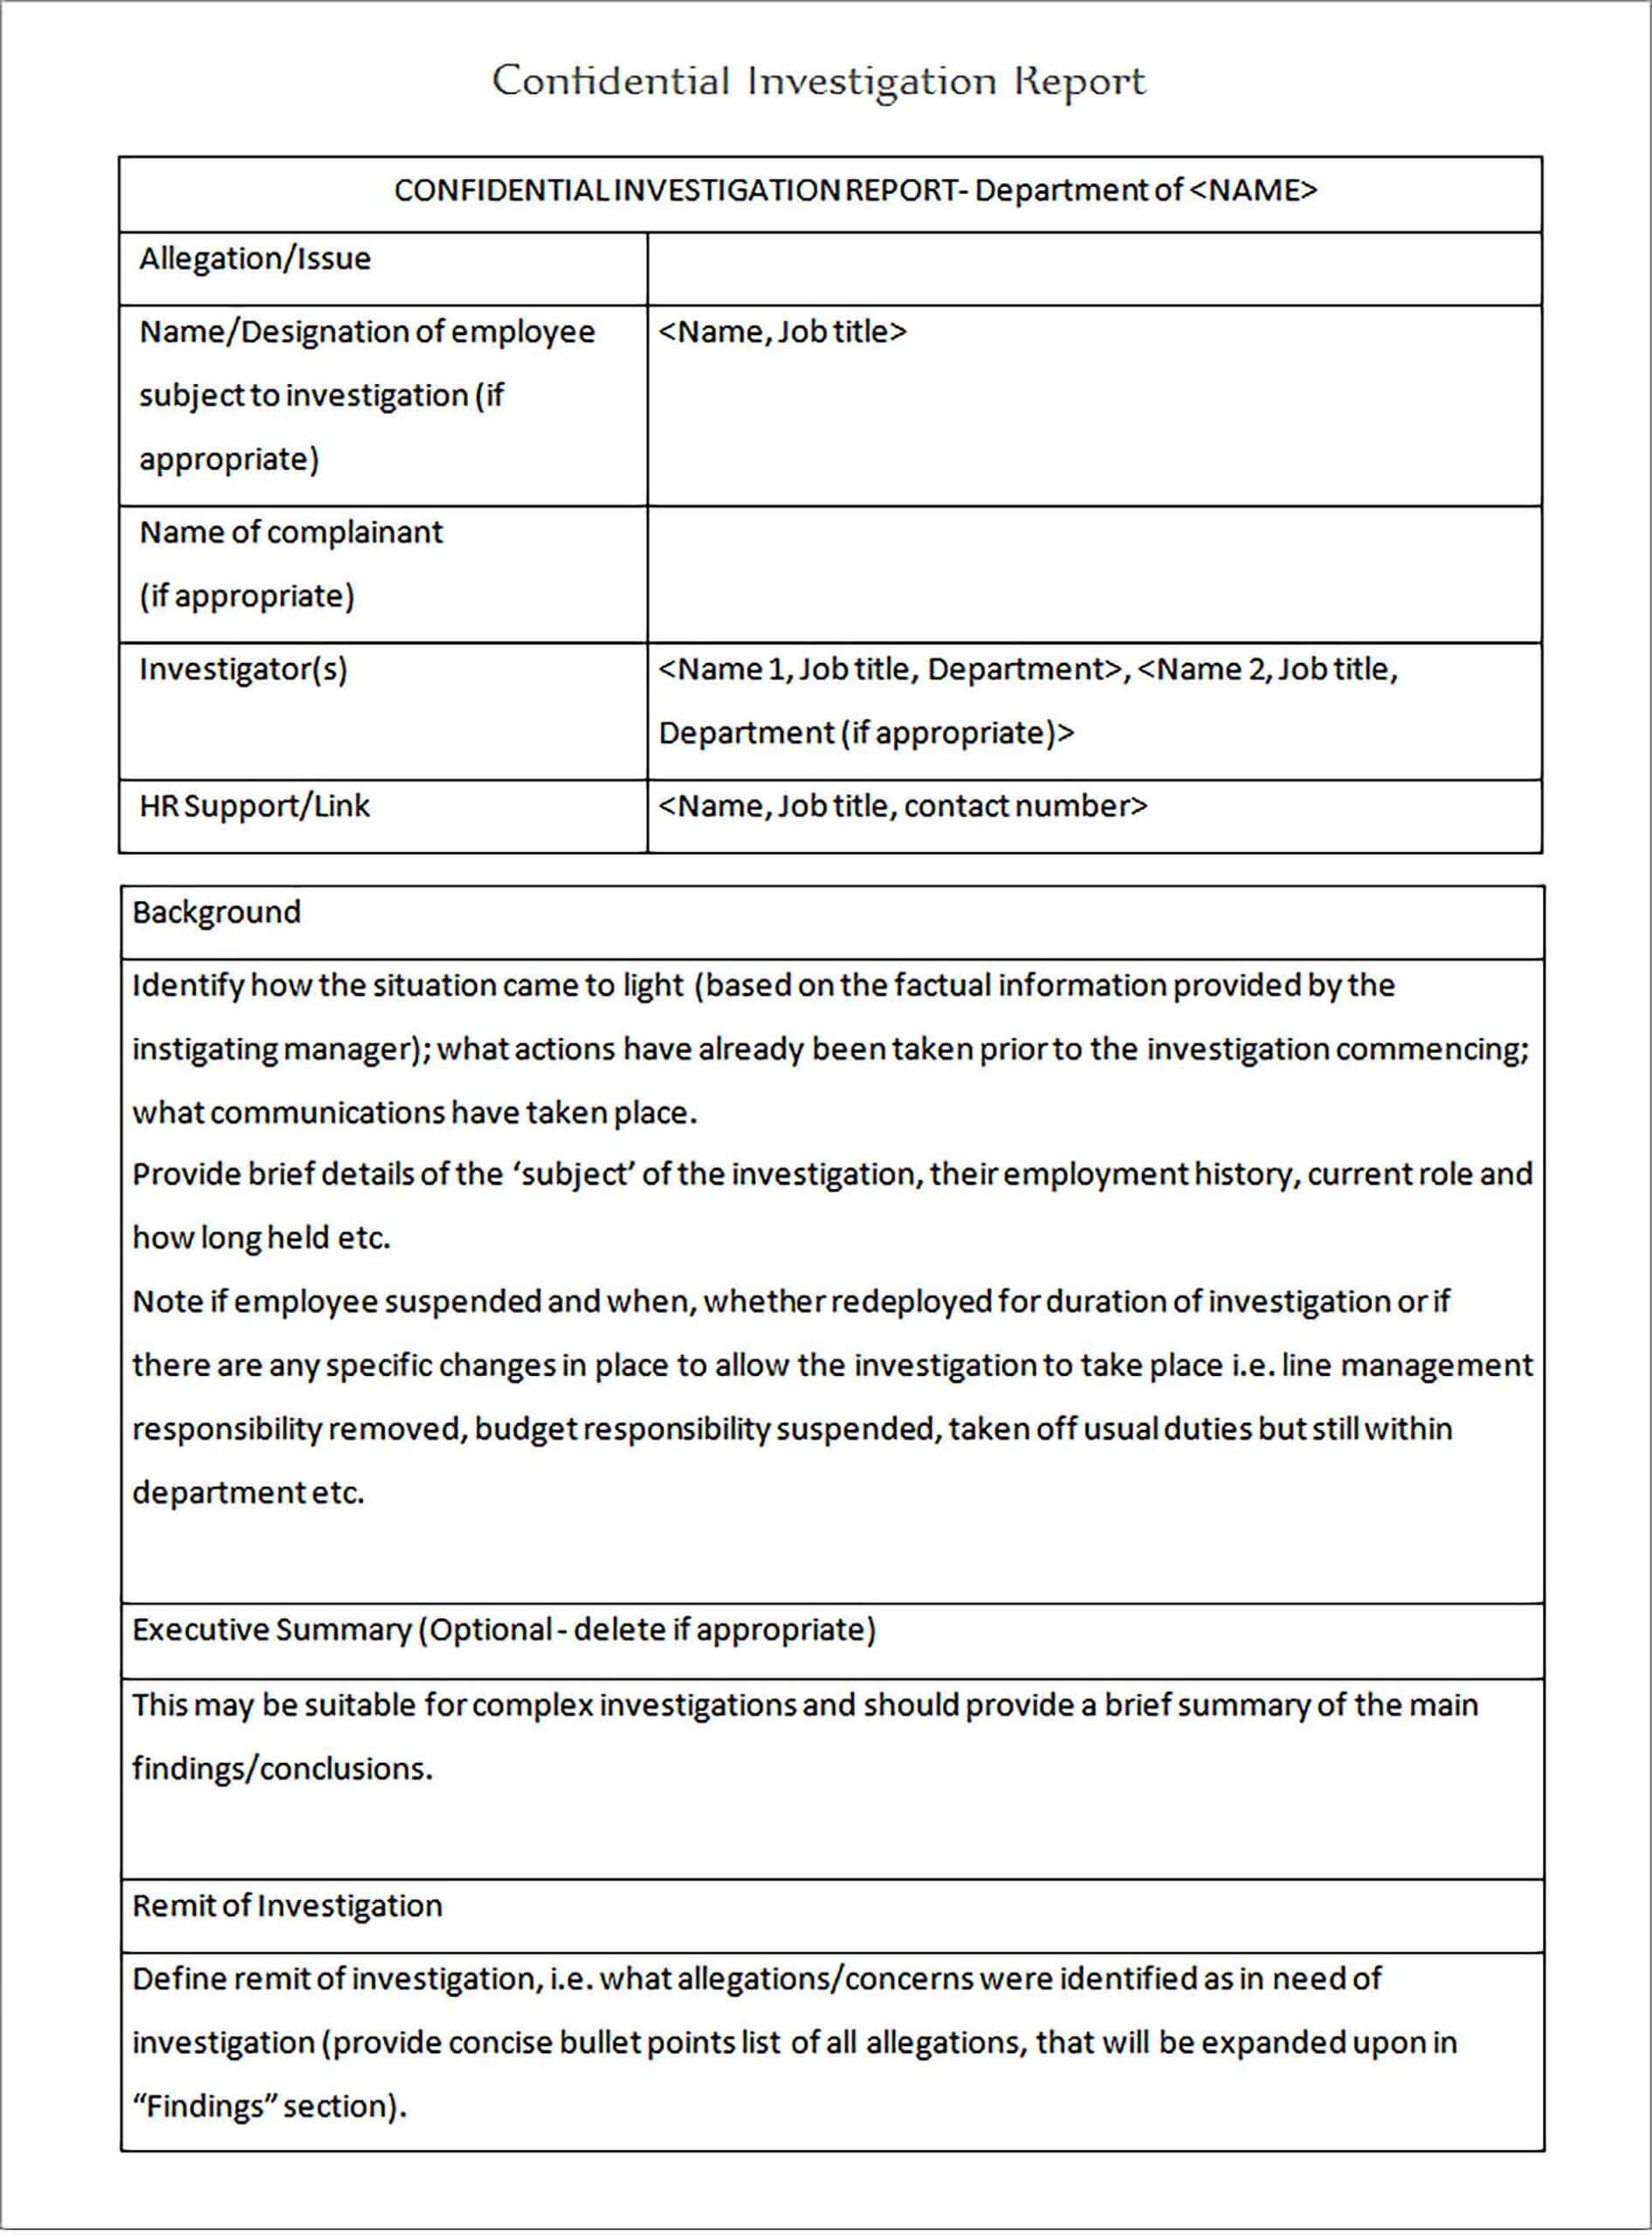 Sample Workplace Confidential Investigation Report Template